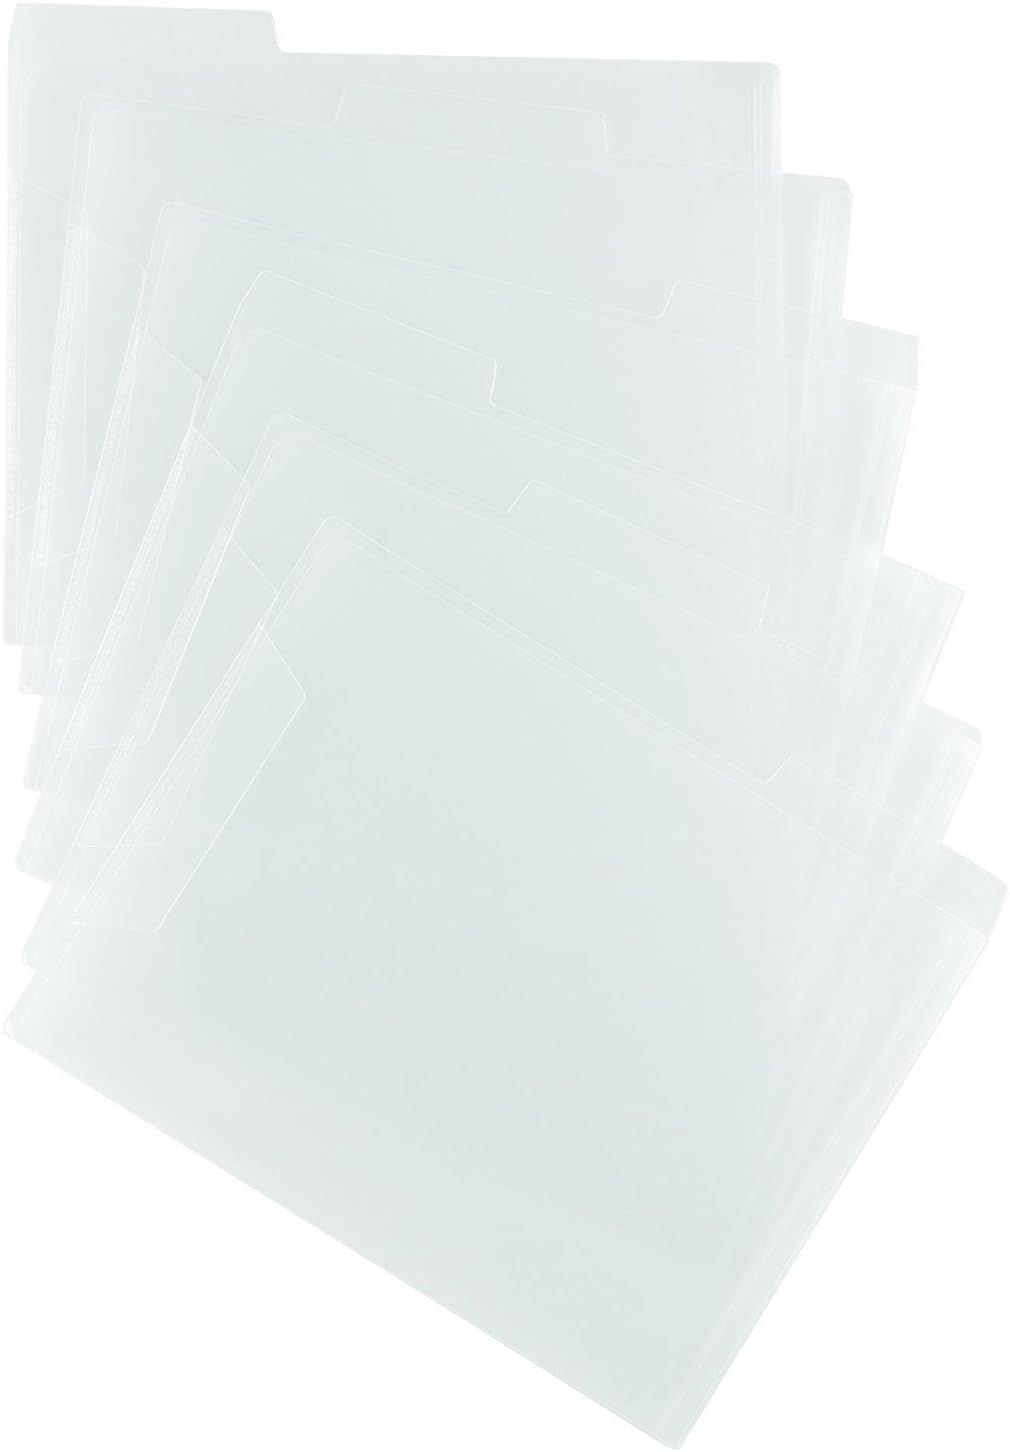 1InTheOffice Translucent Poly File Folders, Clear, 6 Pack | Amazon (US)